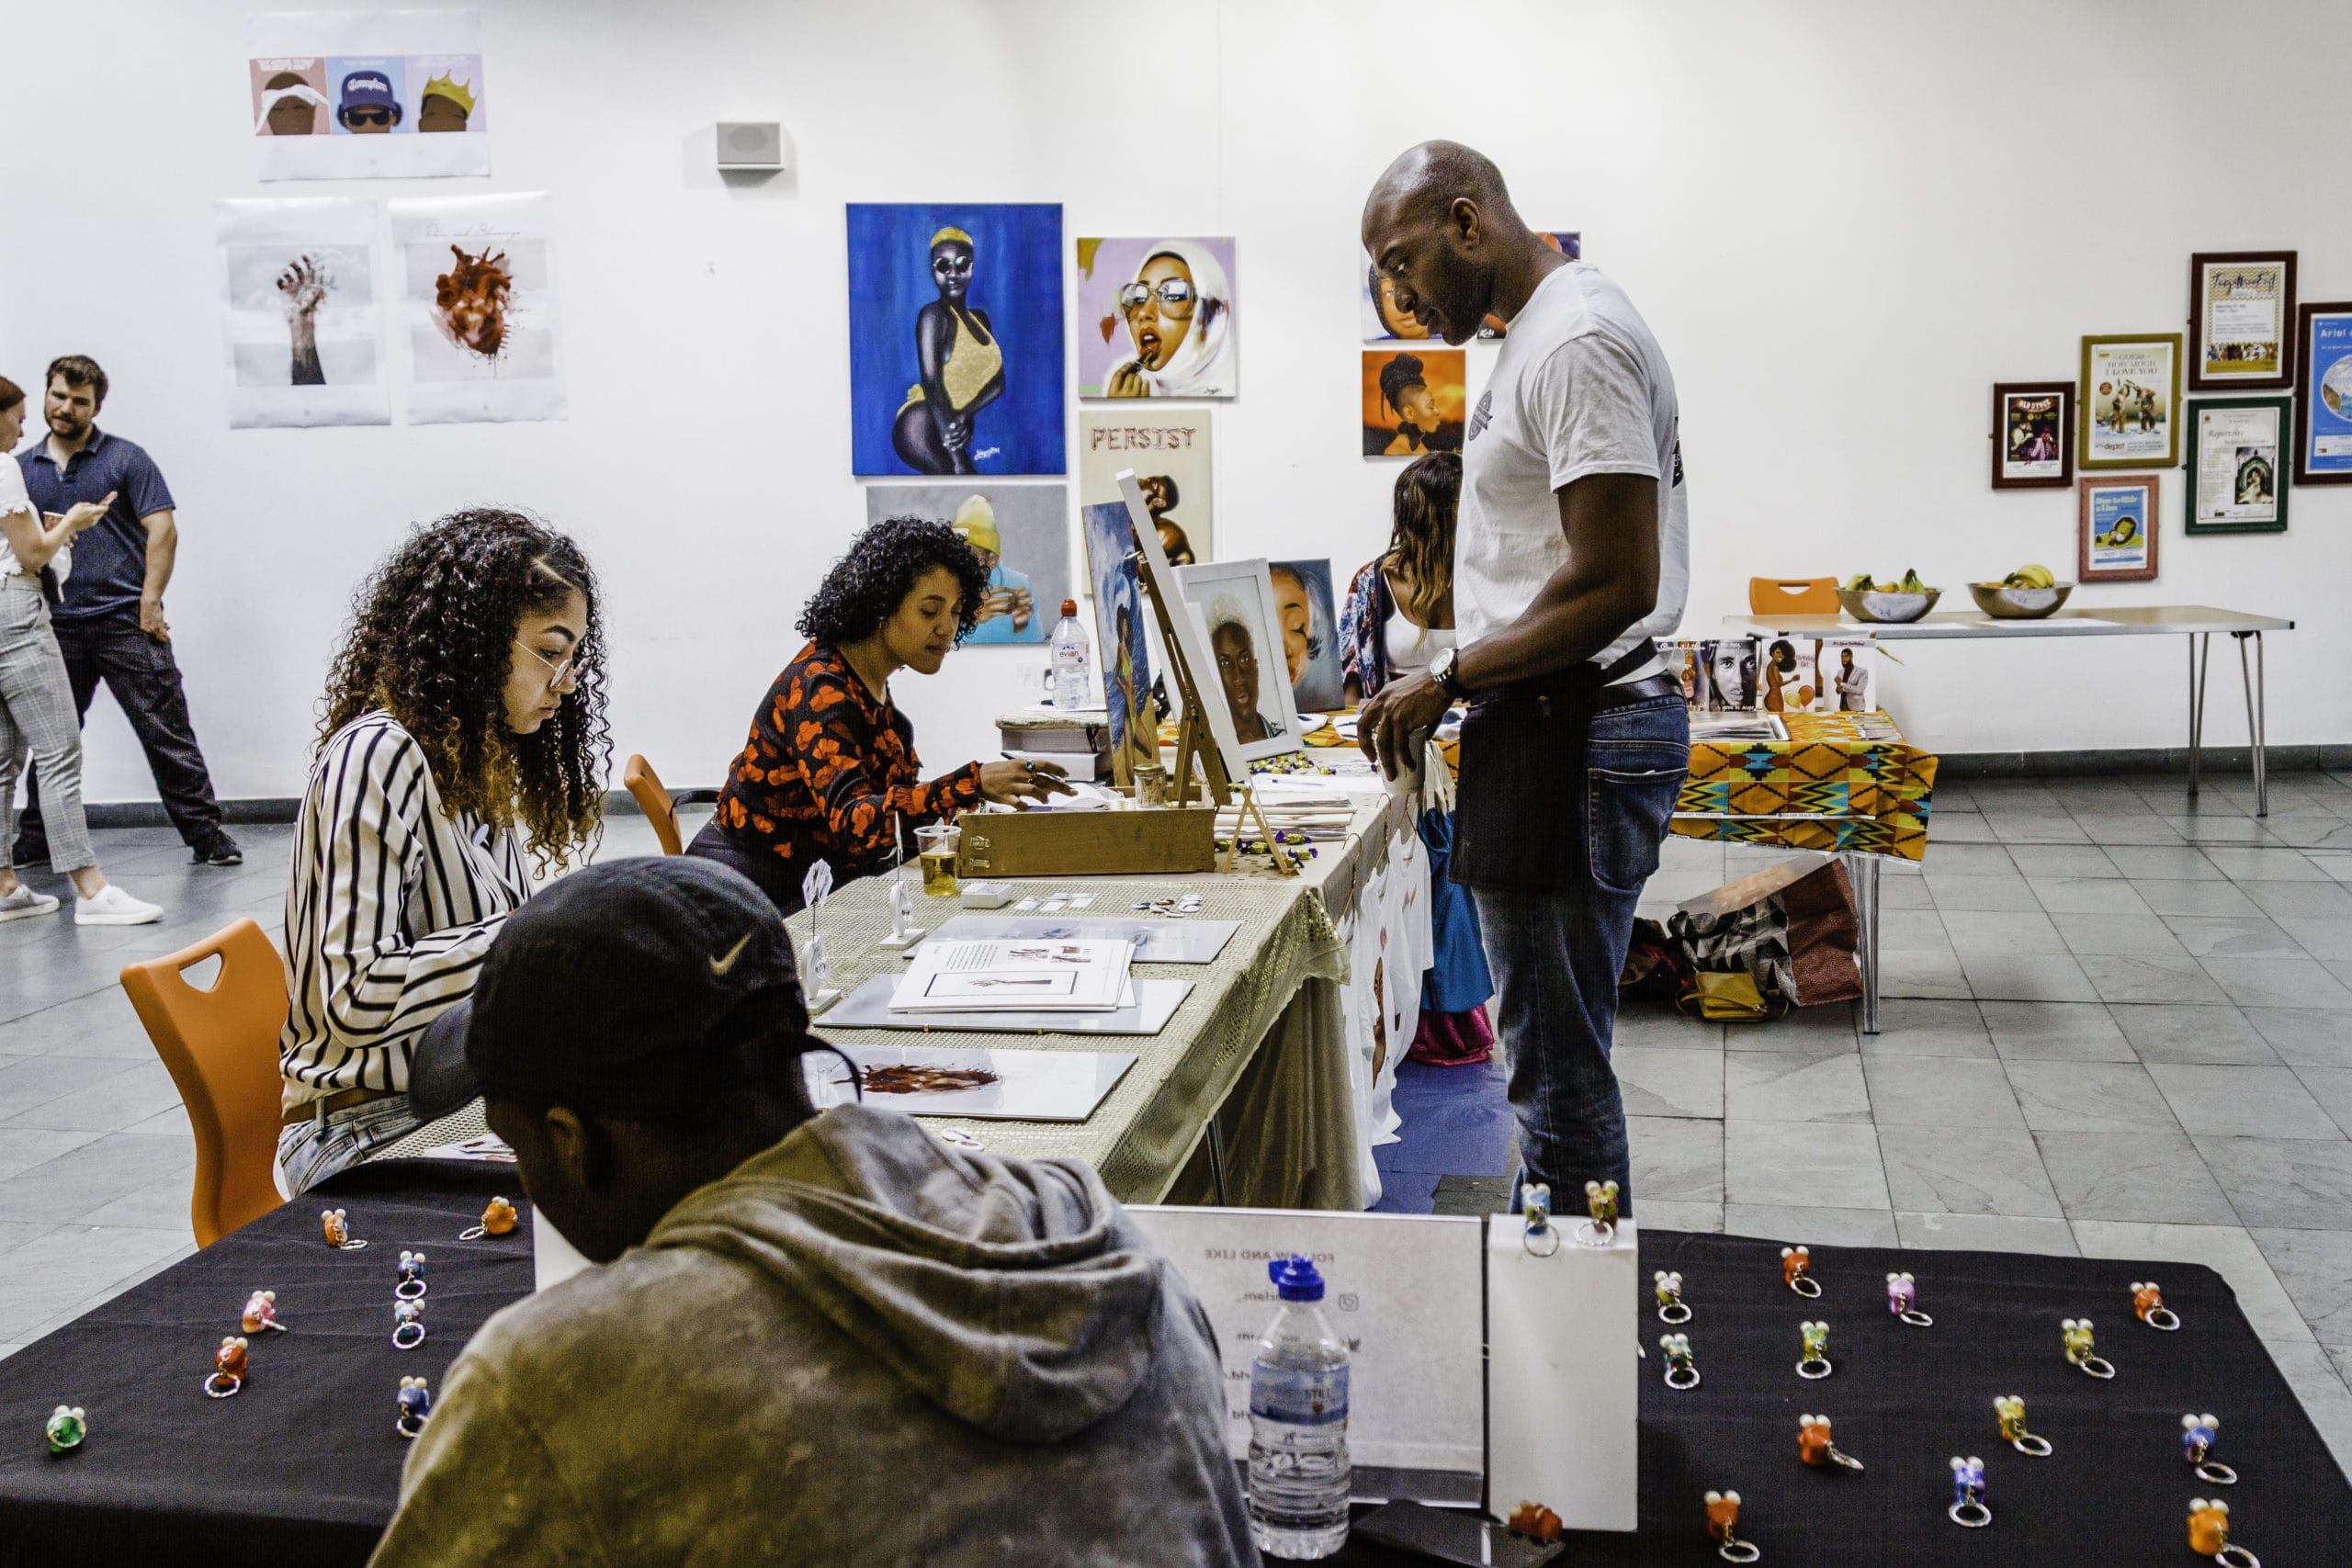 The artsdepot building is busy during an art event. In the centre of the image, black-owned arts and crafts vendors display their work. Vibrant paintings, prints, t-shirts and keyrings are on display as customers engage with the stalls.